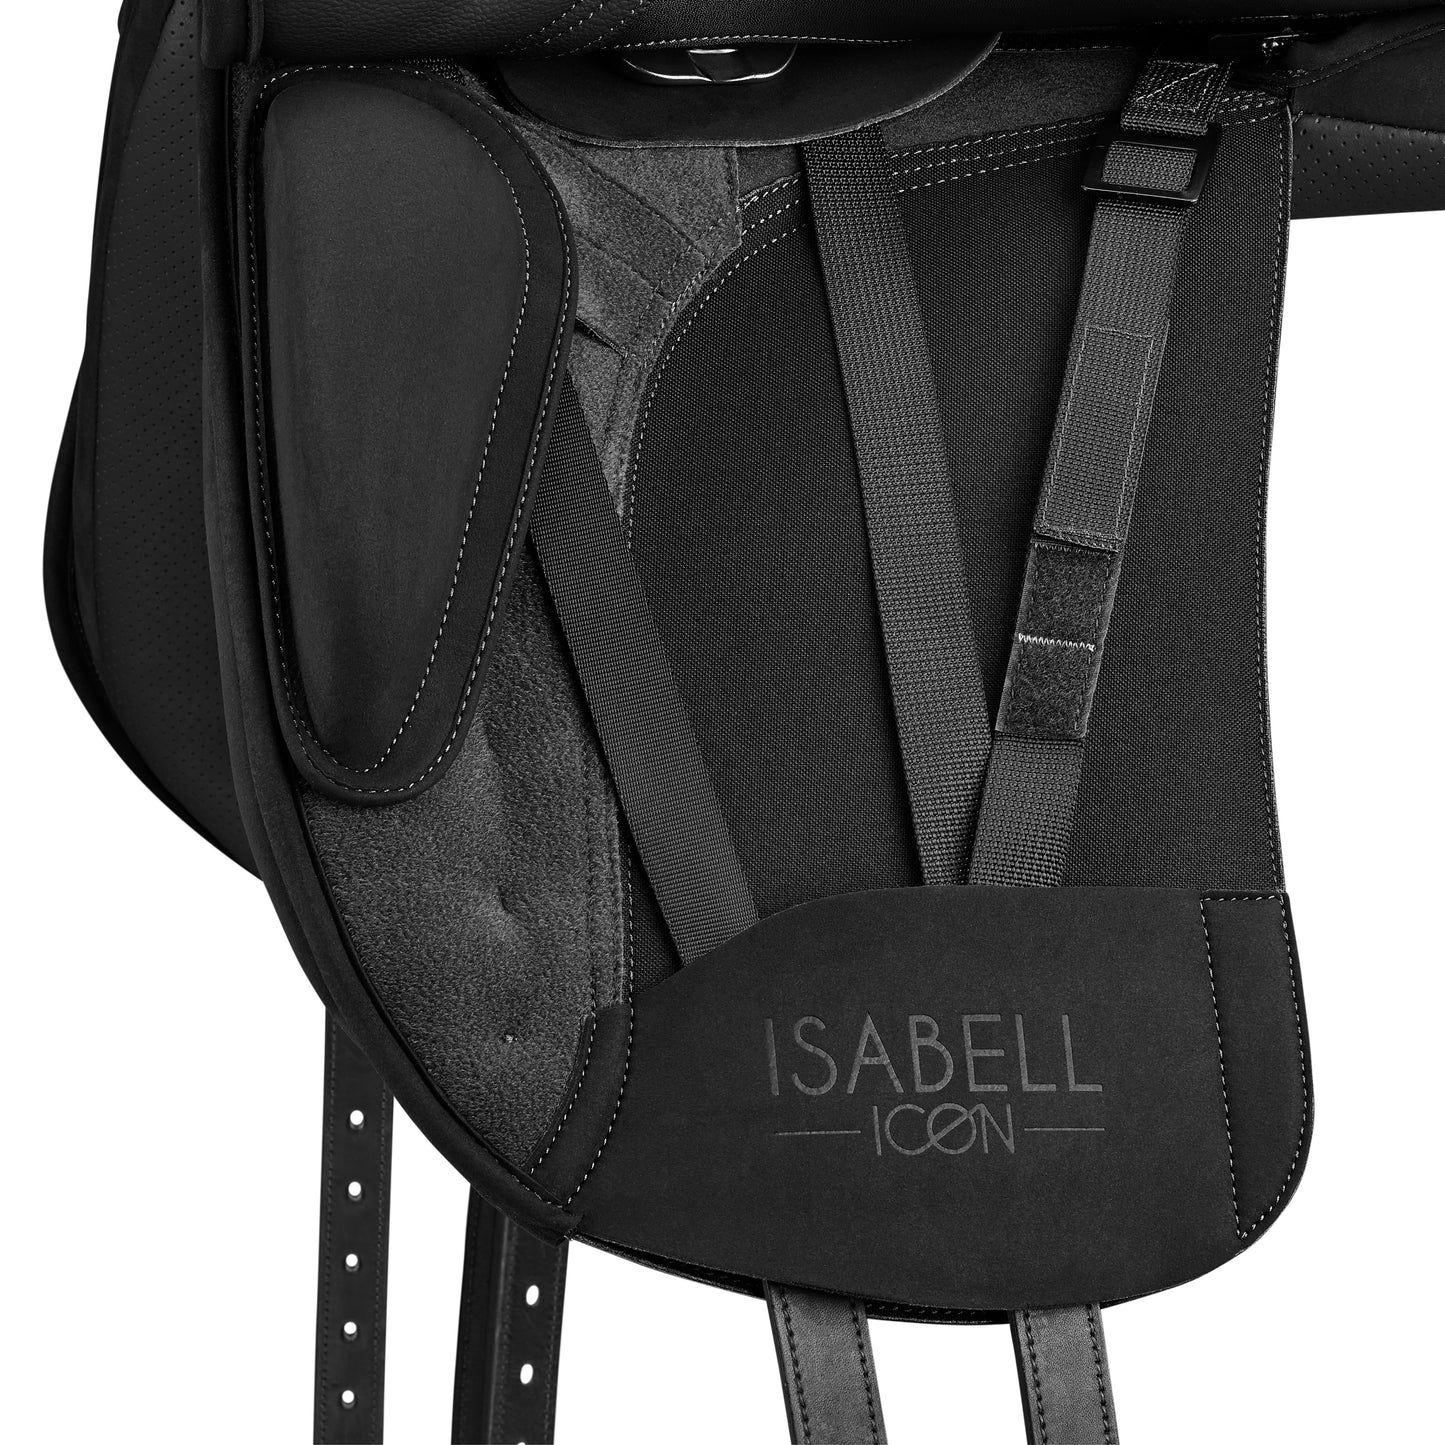 Wintec Isabell Icon 17"